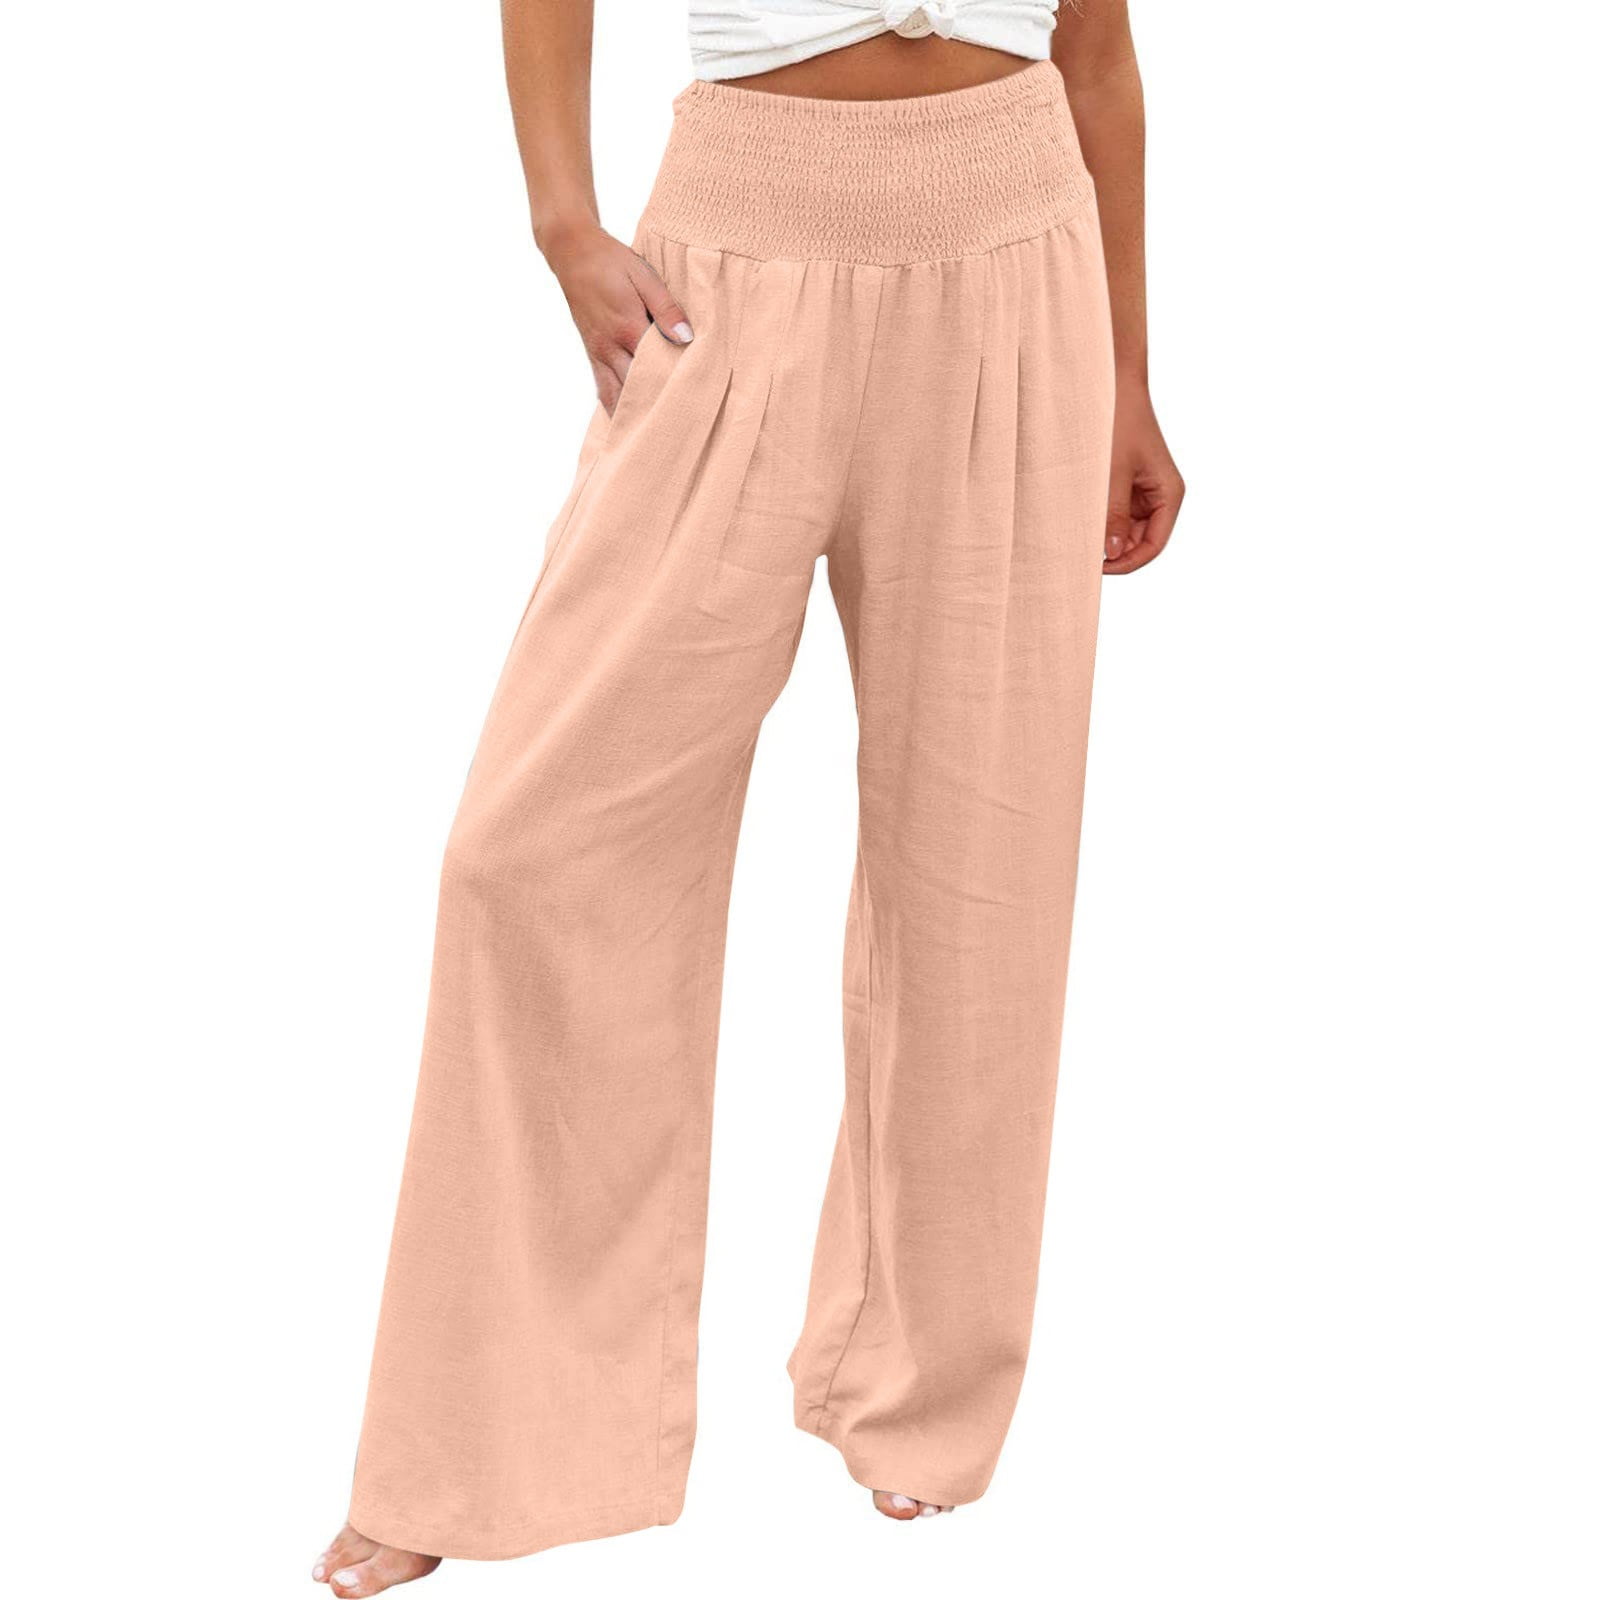 ZQGJB Women Cotton Linen Pants Plus Size Ruched Elastic High Waisted Wide  Leg Palazzo Lounge Pants Loose Beach Trousers with Pockets Pink M 